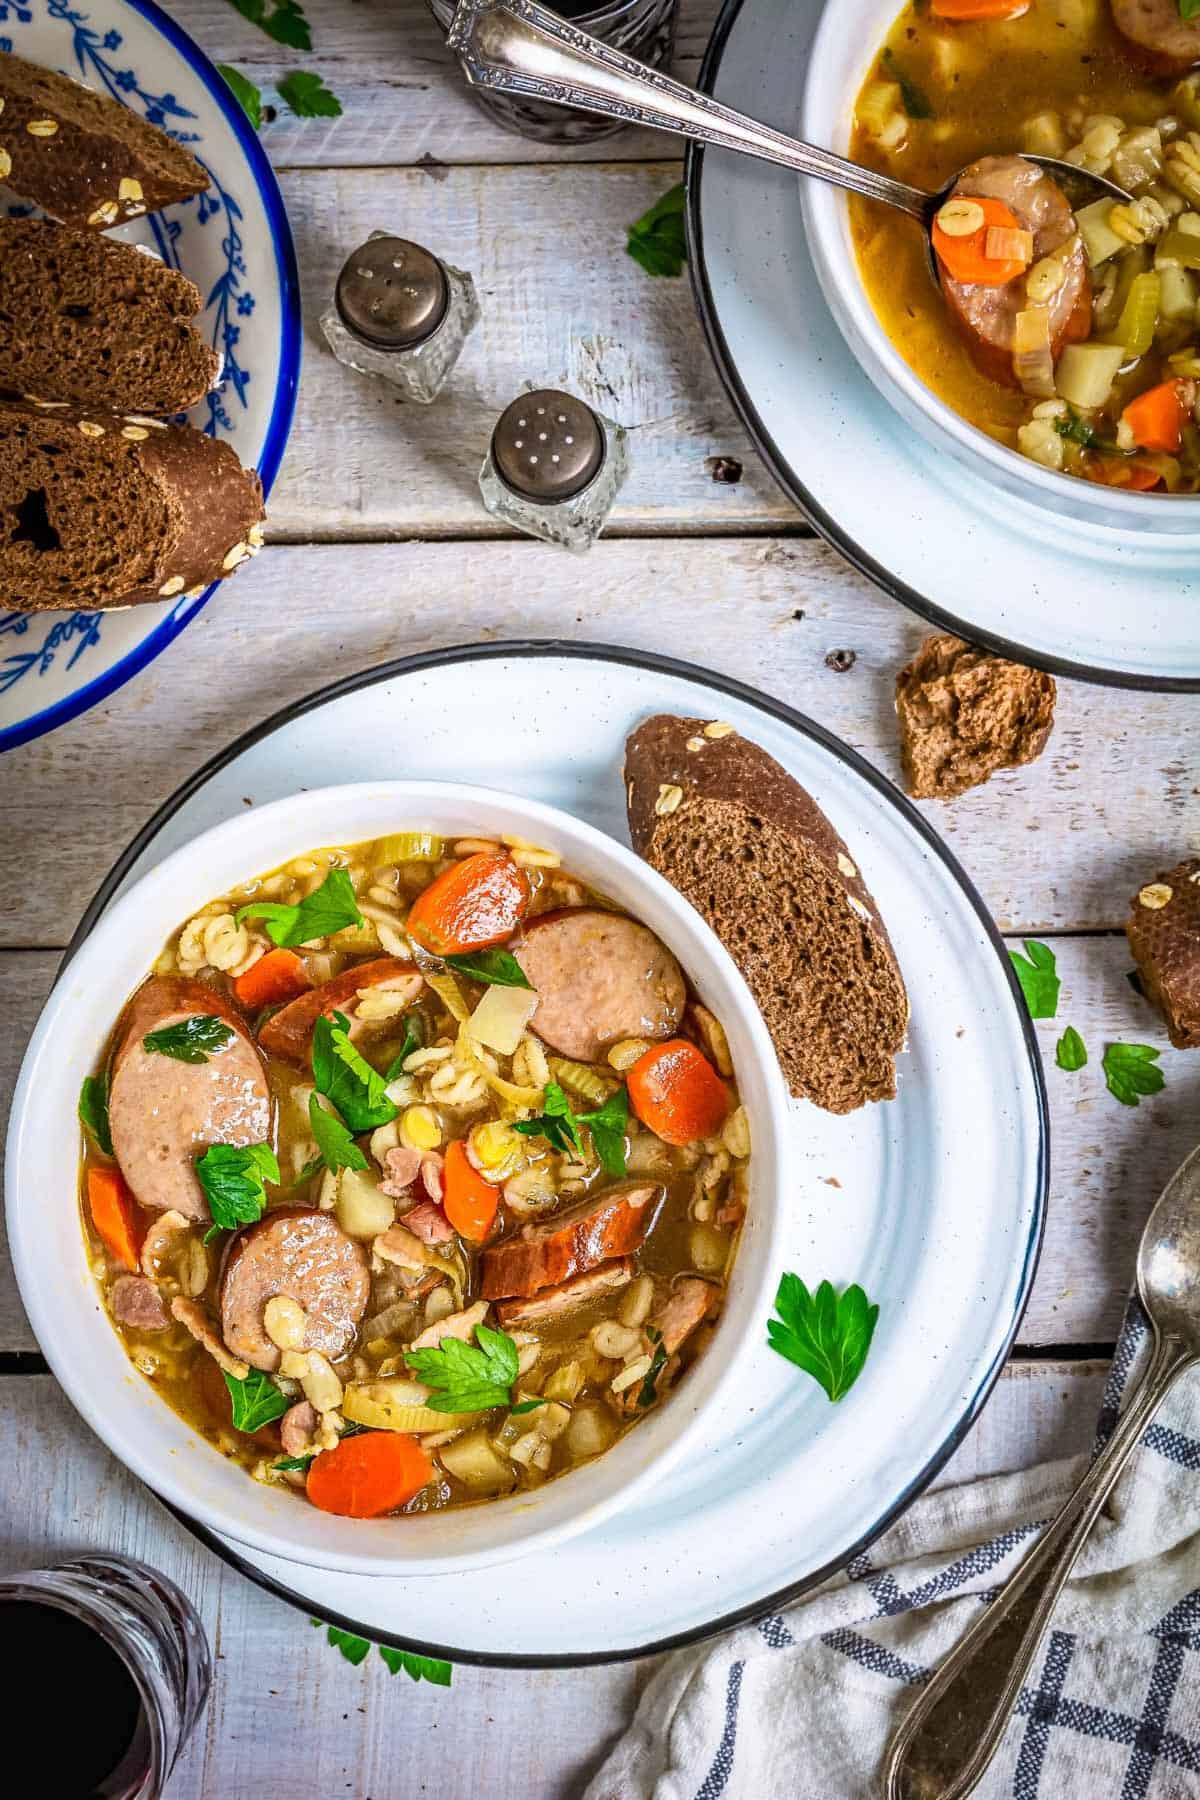 Servings of barley sausage and vegetable soup with bread on a table.